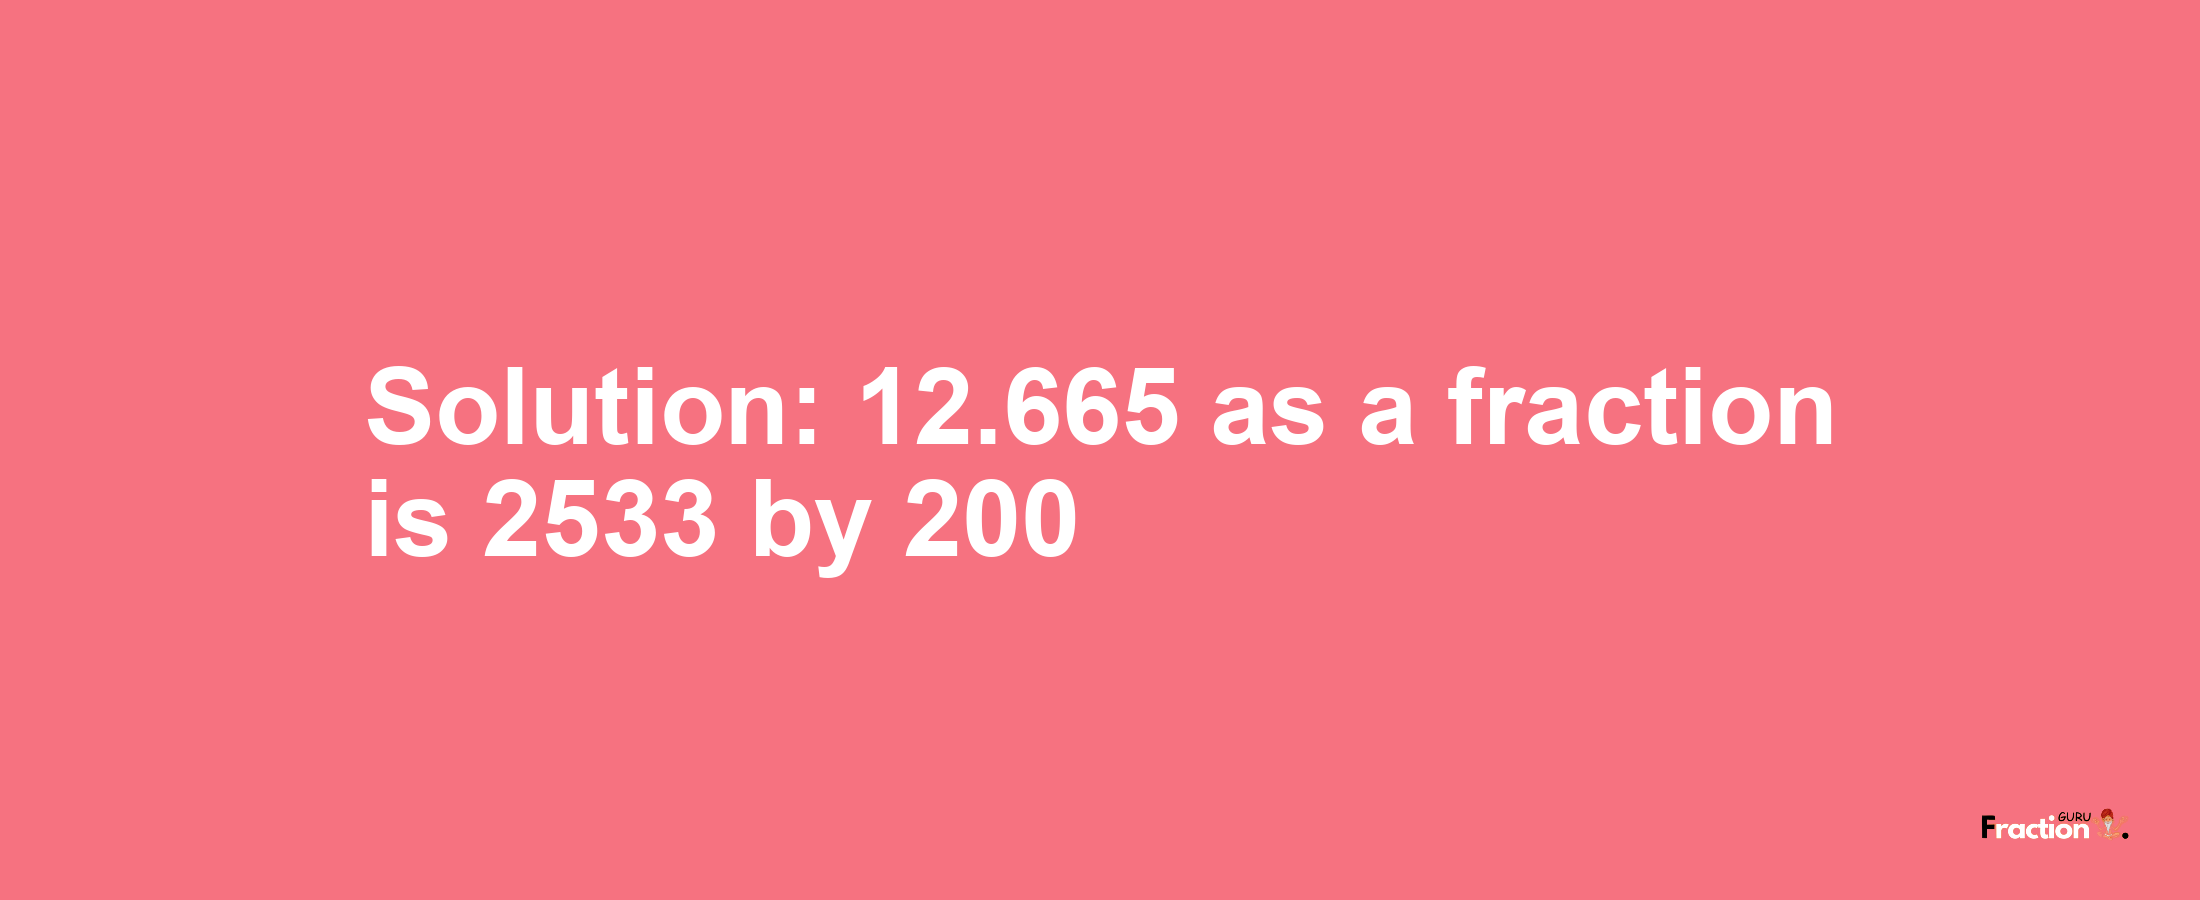 Solution:12.665 as a fraction is 2533/200